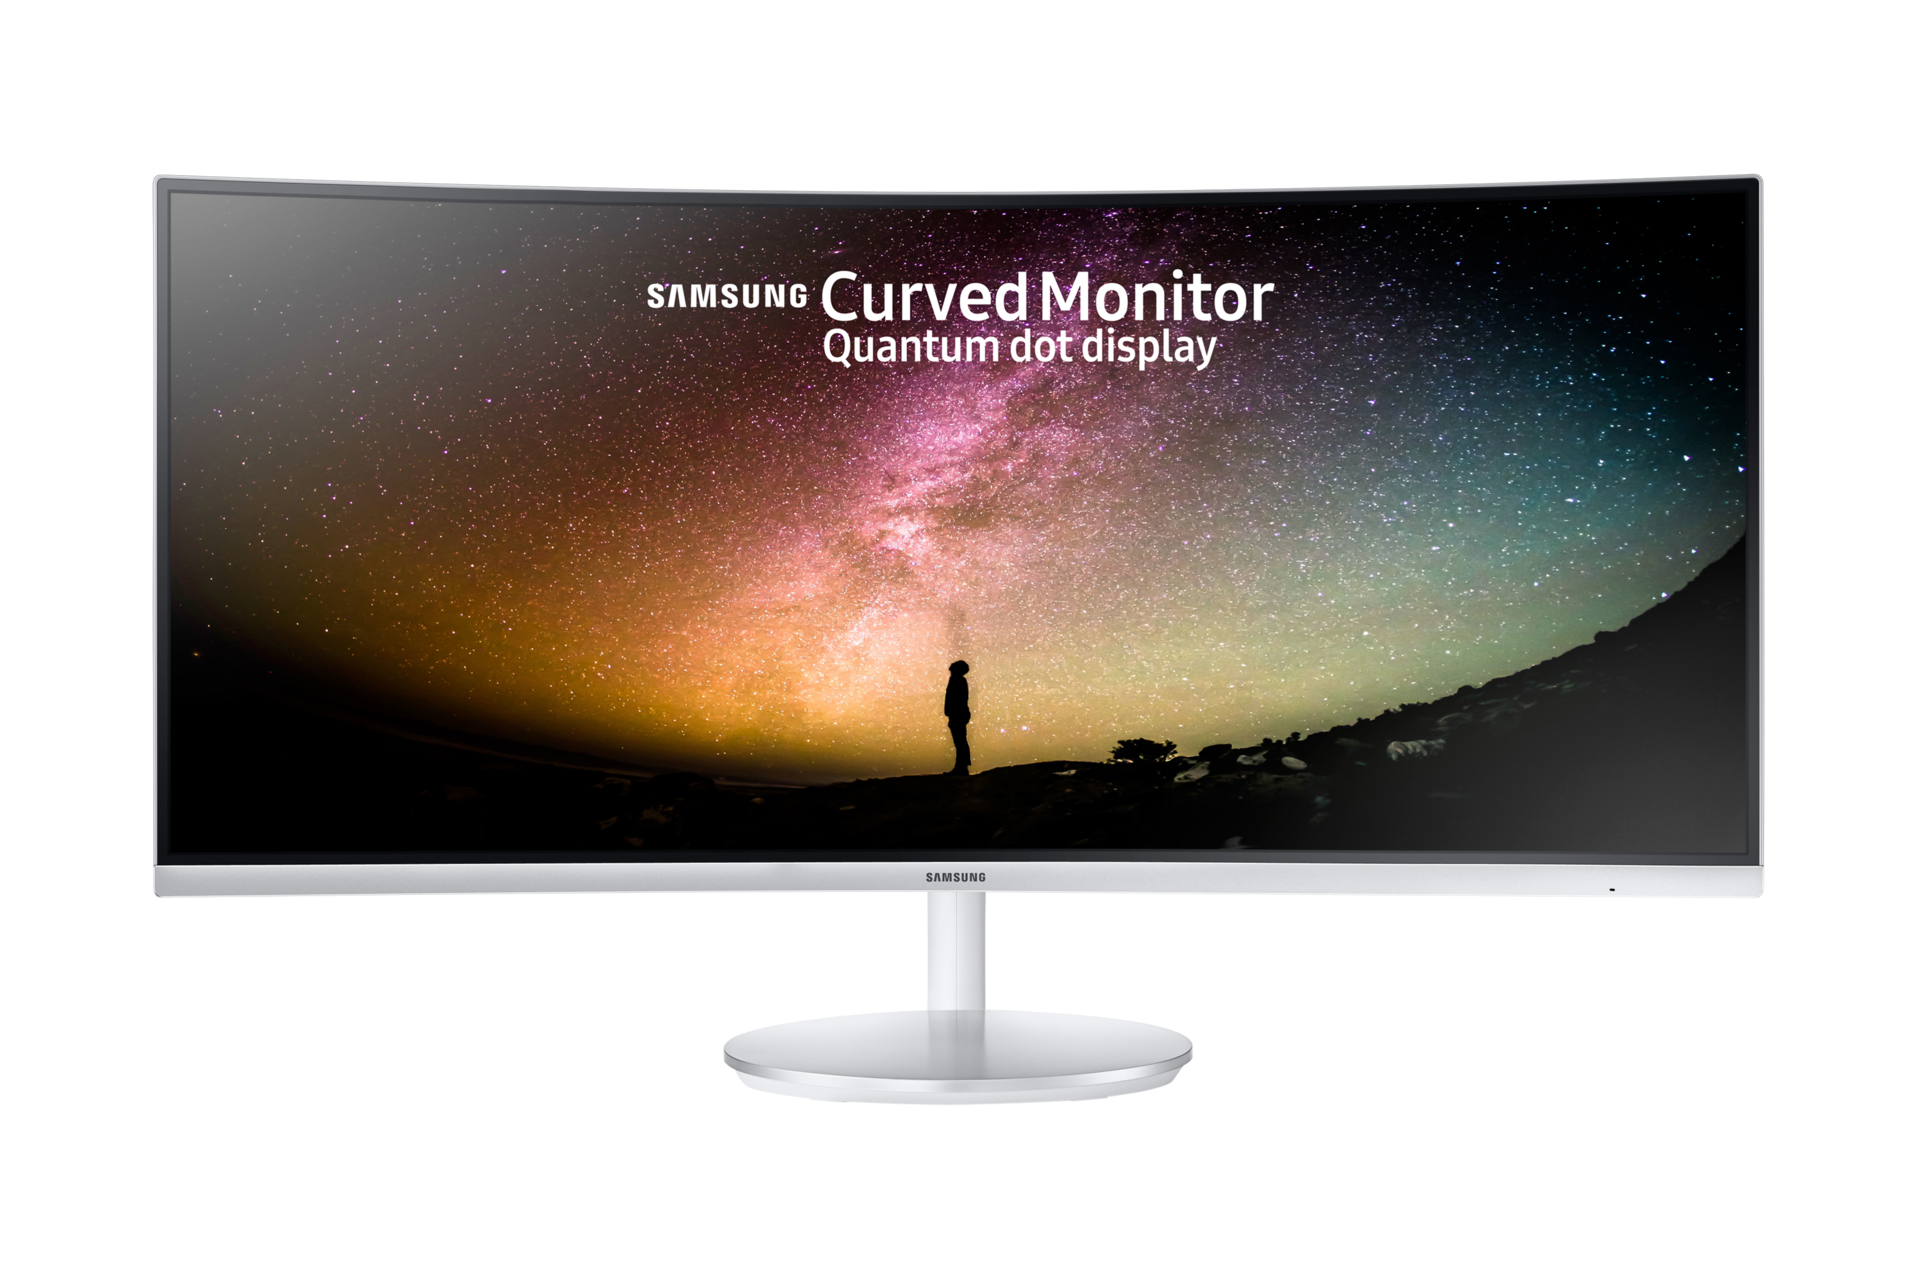 http://images.samsung.com/is/image/samsung/fr-curved-cf791-lc34f791wquxen-001-front-white?$PD_GALLERY_JPG$